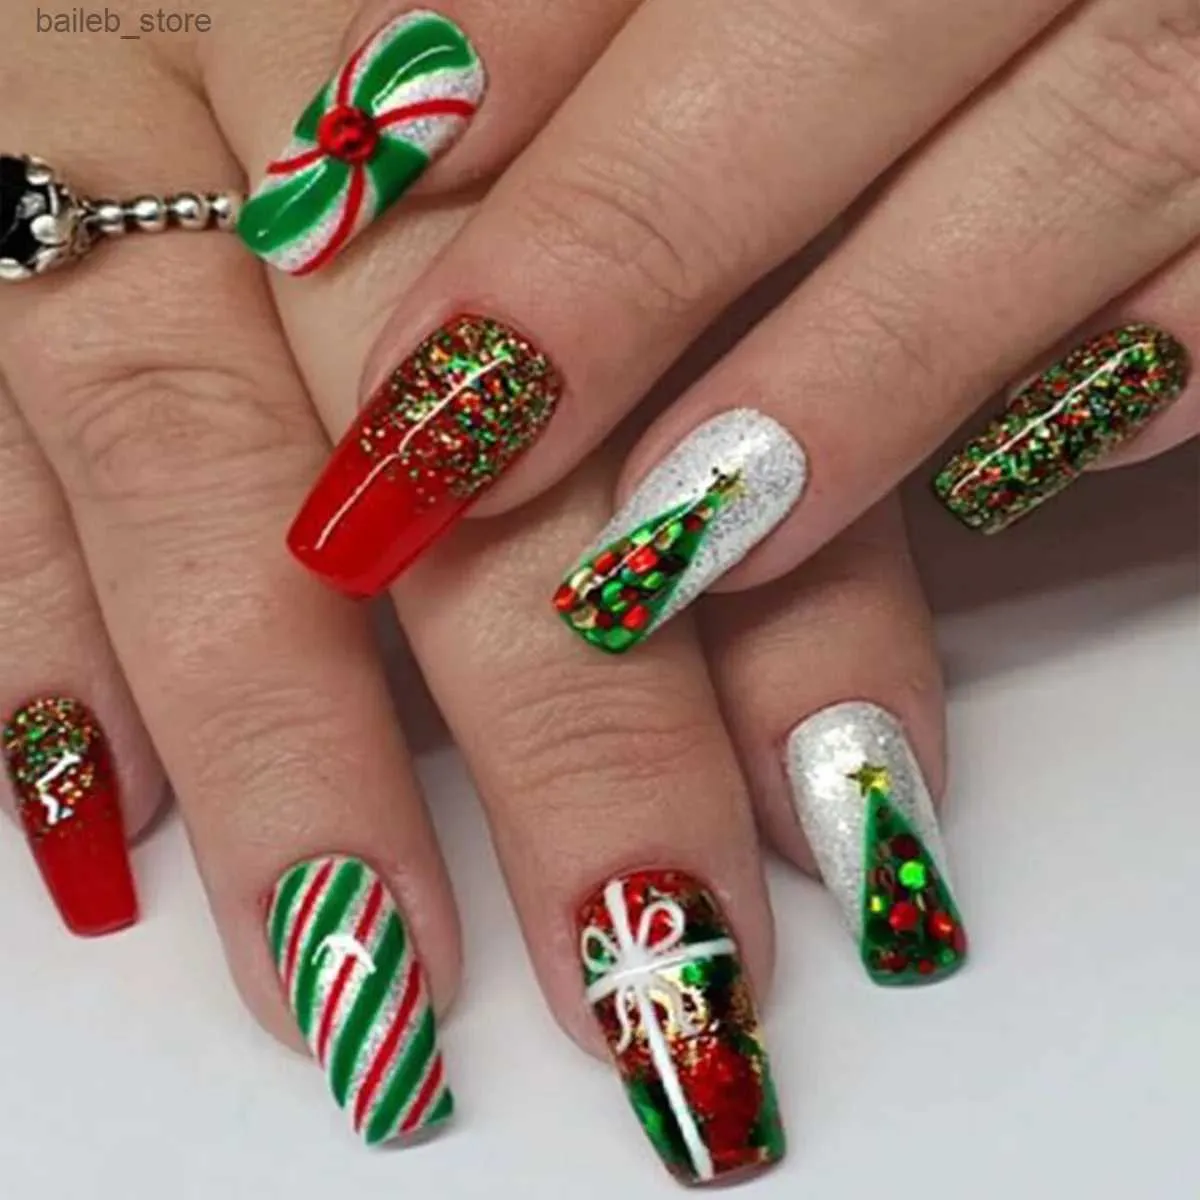 False Nails 24Pcs Christmas Ballet False Nails Long Coffin Press on Nails Wearabe Fake Nails with Snowflake Design Full Cover Manicure Tips Y240419